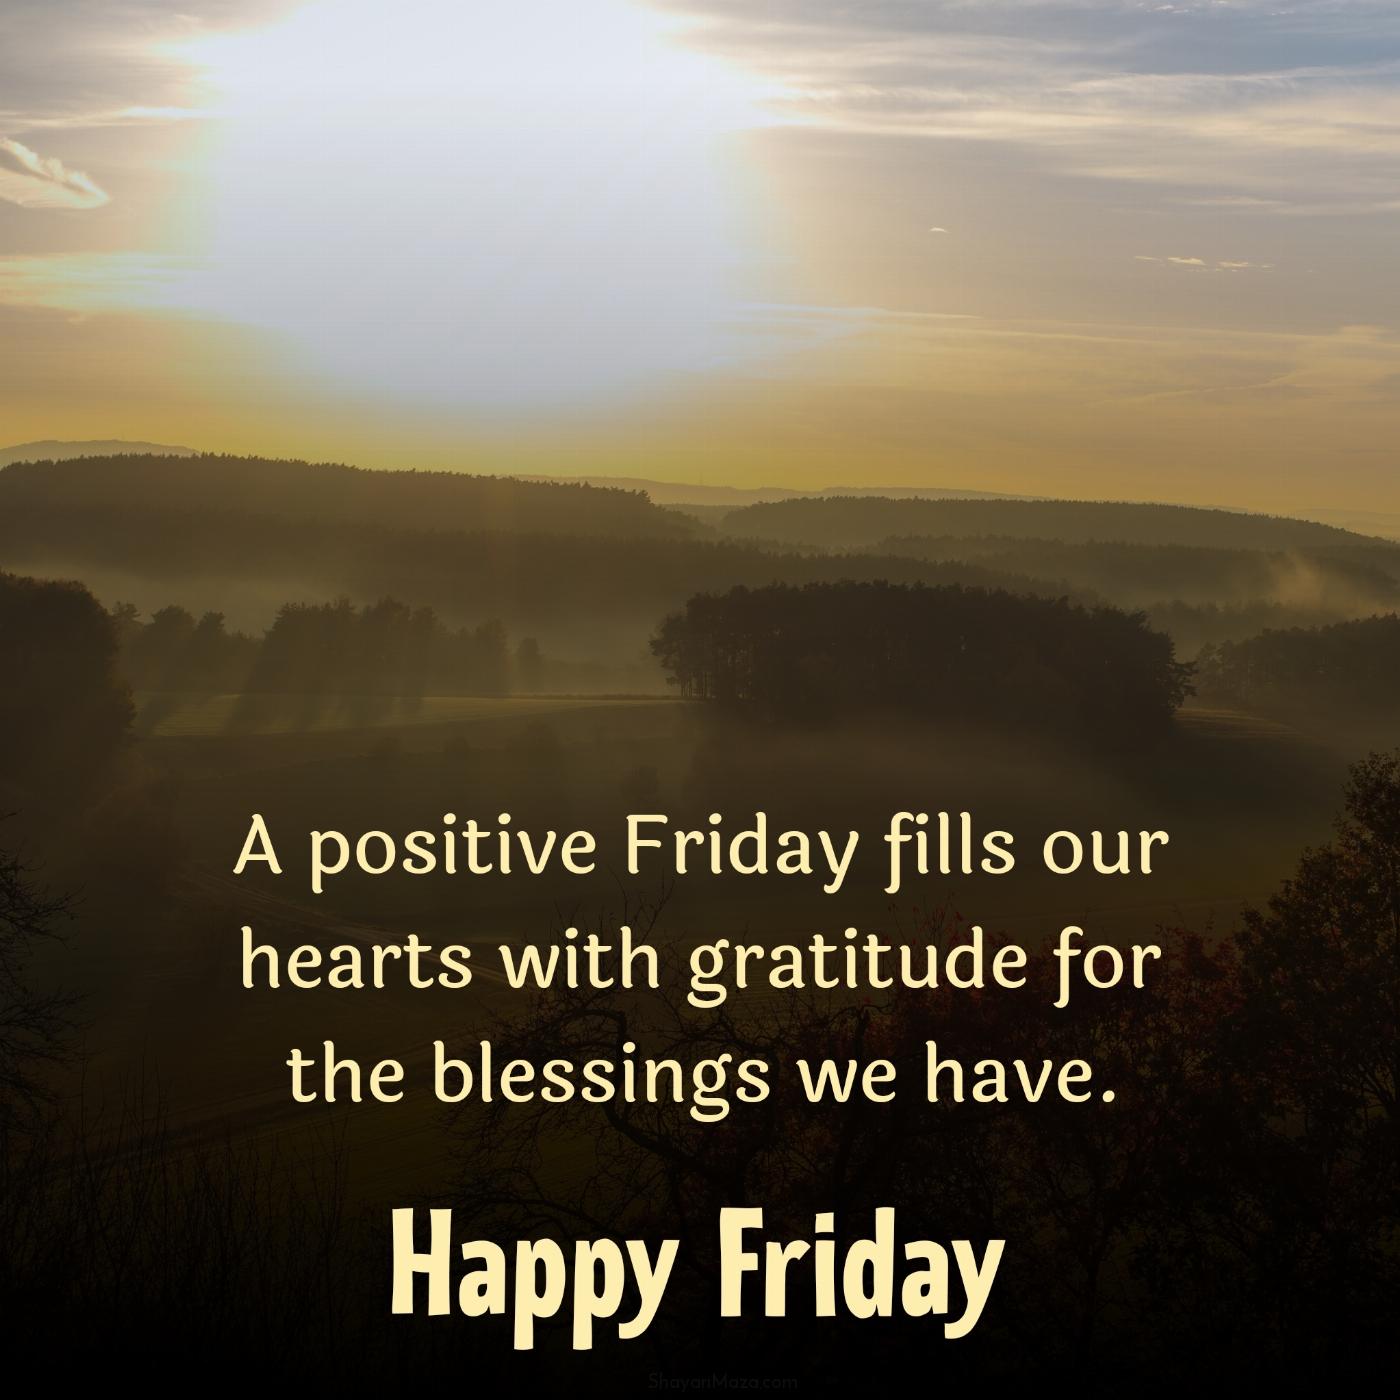 A positive Friday fills our hearts with gratitude for the blessings